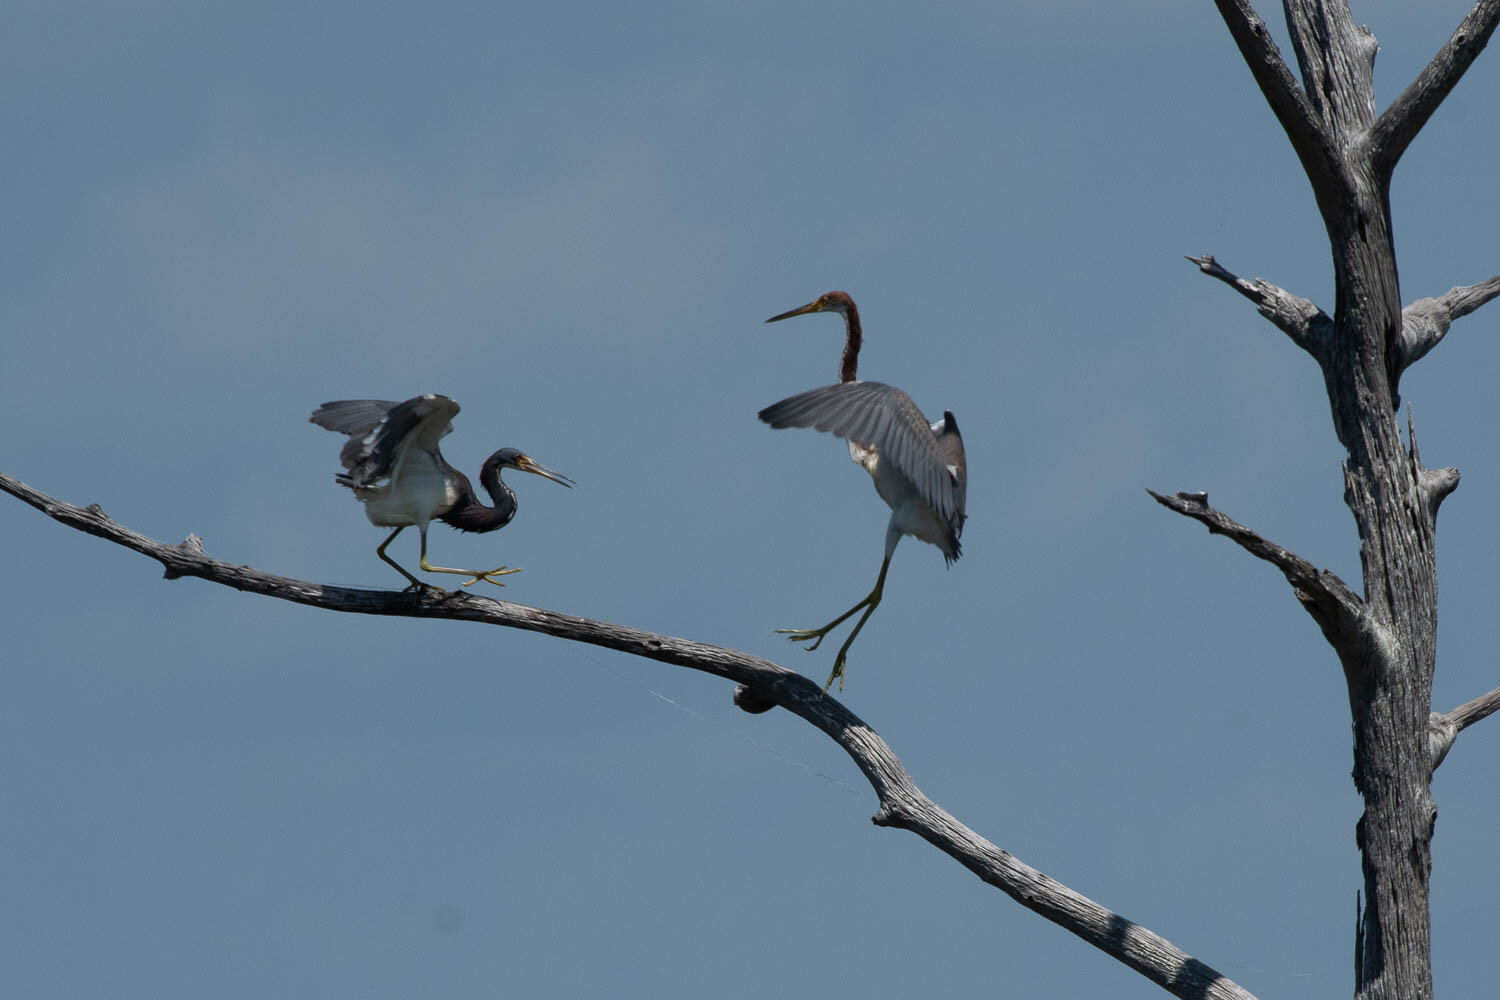 Tricolored Herons